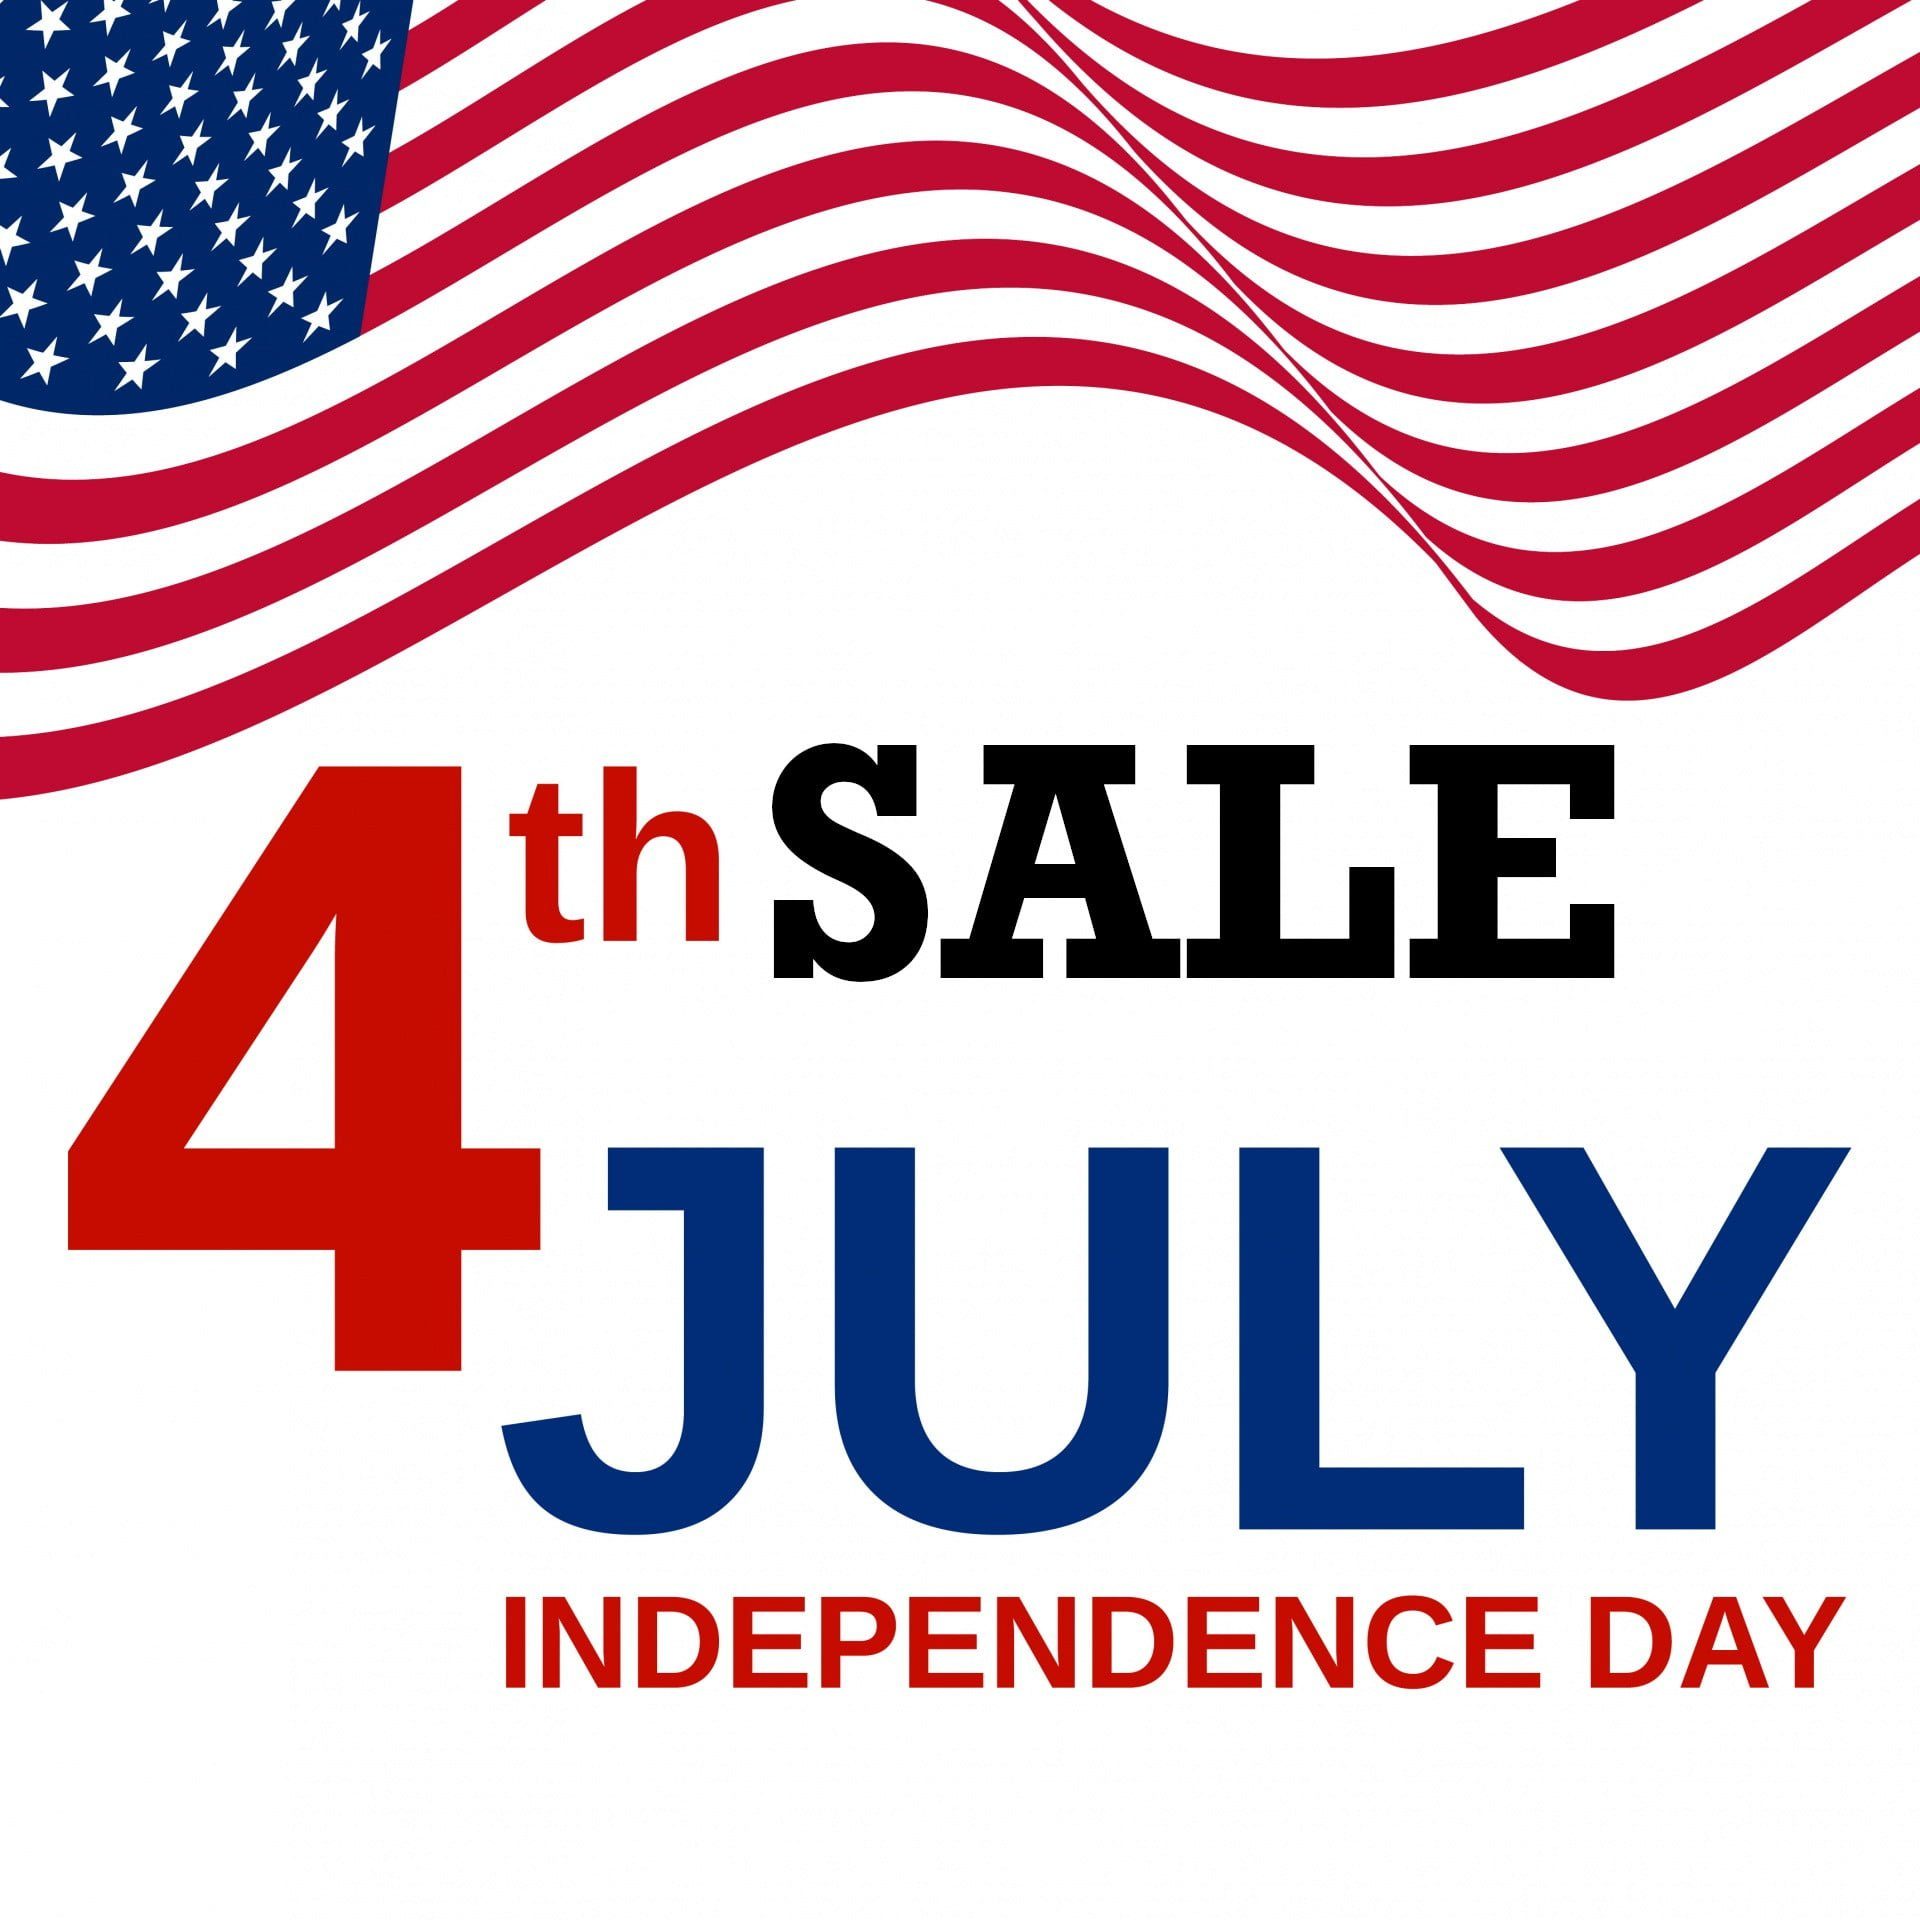 CBD-4th-of-july-independence-day